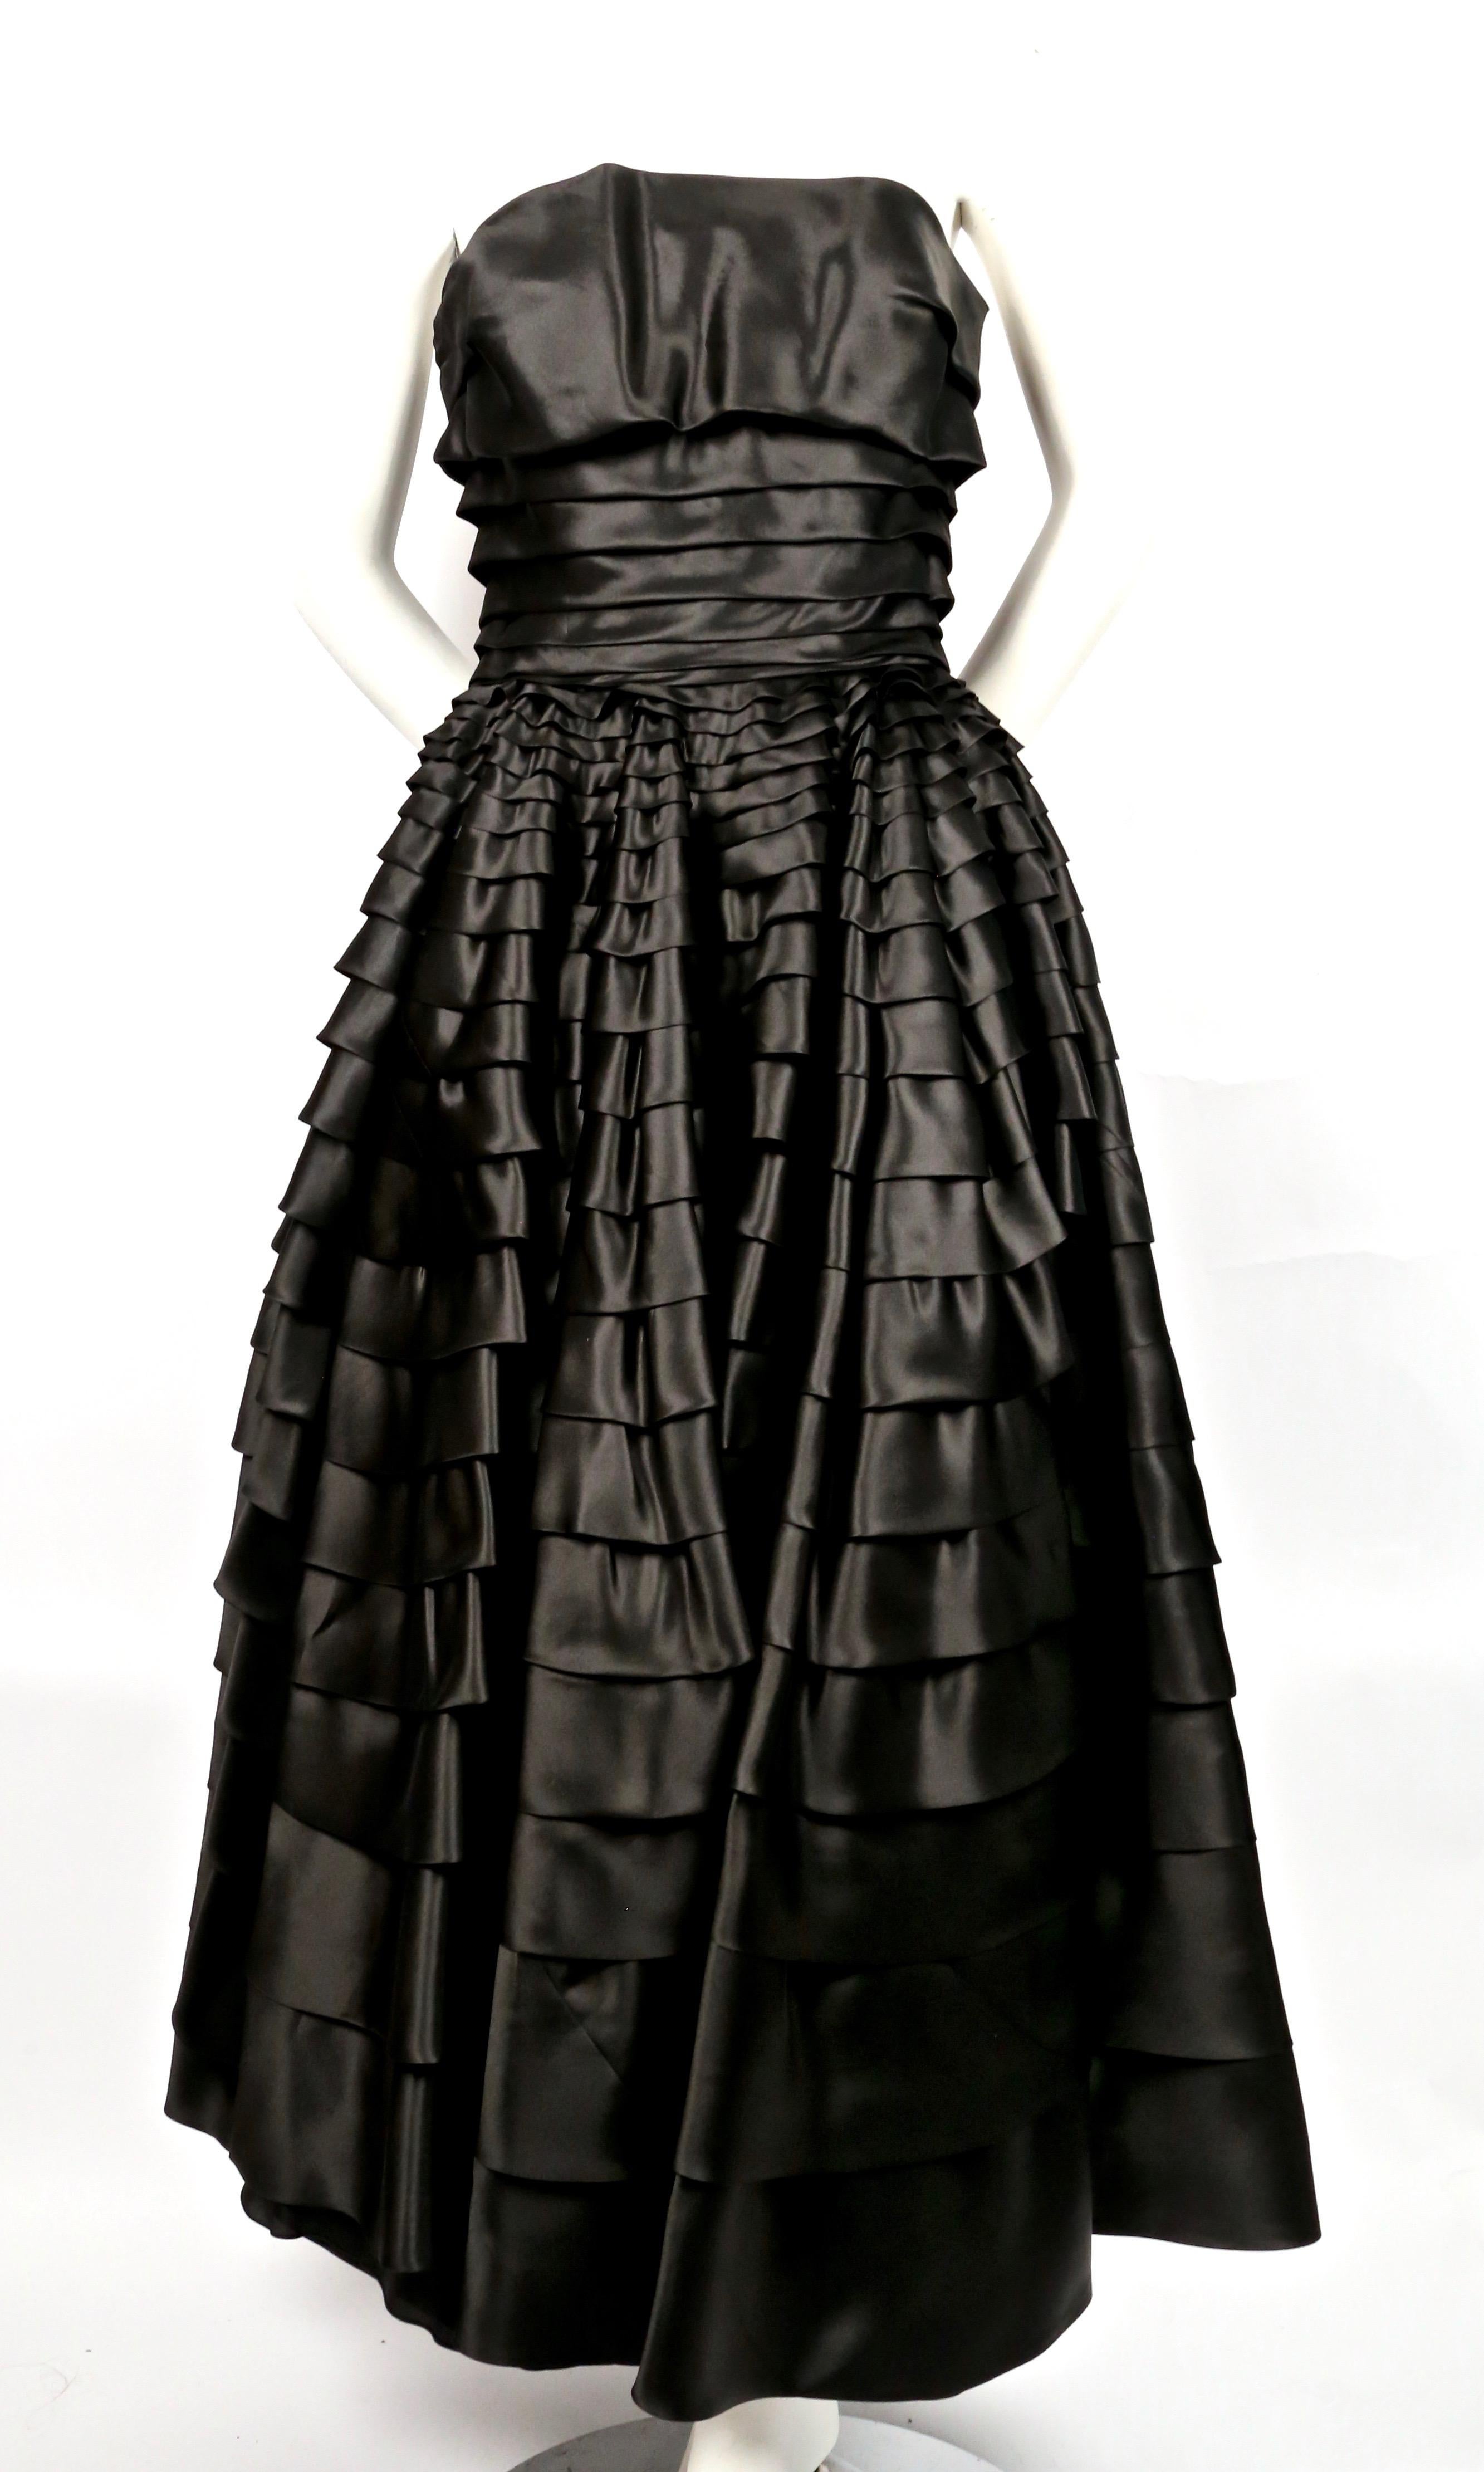 Stunning, jet-black silk, strapless dress with ruffles designed by John Galliano dating to the 1990's. Dress is labeled a French size 40 however it has been professionally altered by adding some fabric to bodice. Approximate measurements: bust 34